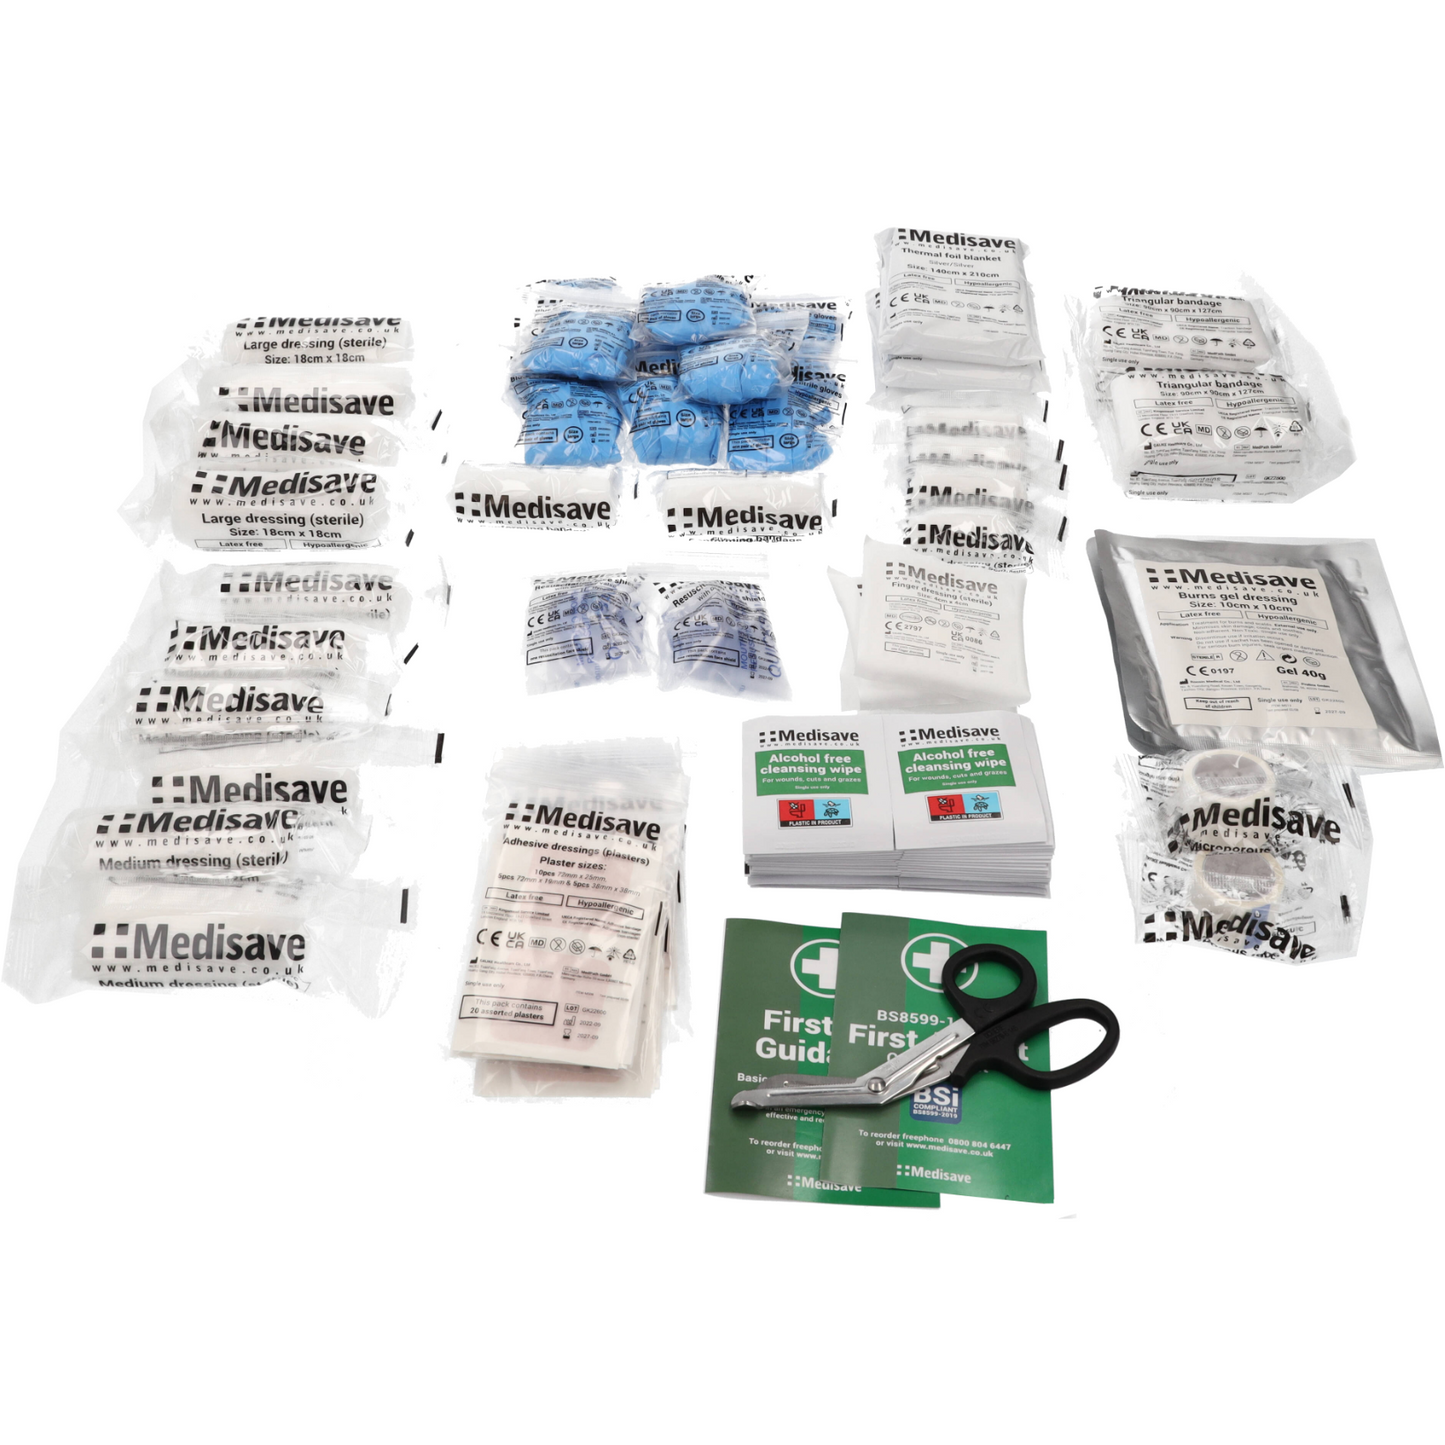 BS8599-1:2019 Workplace First Aid Kit - Large Kit Refill